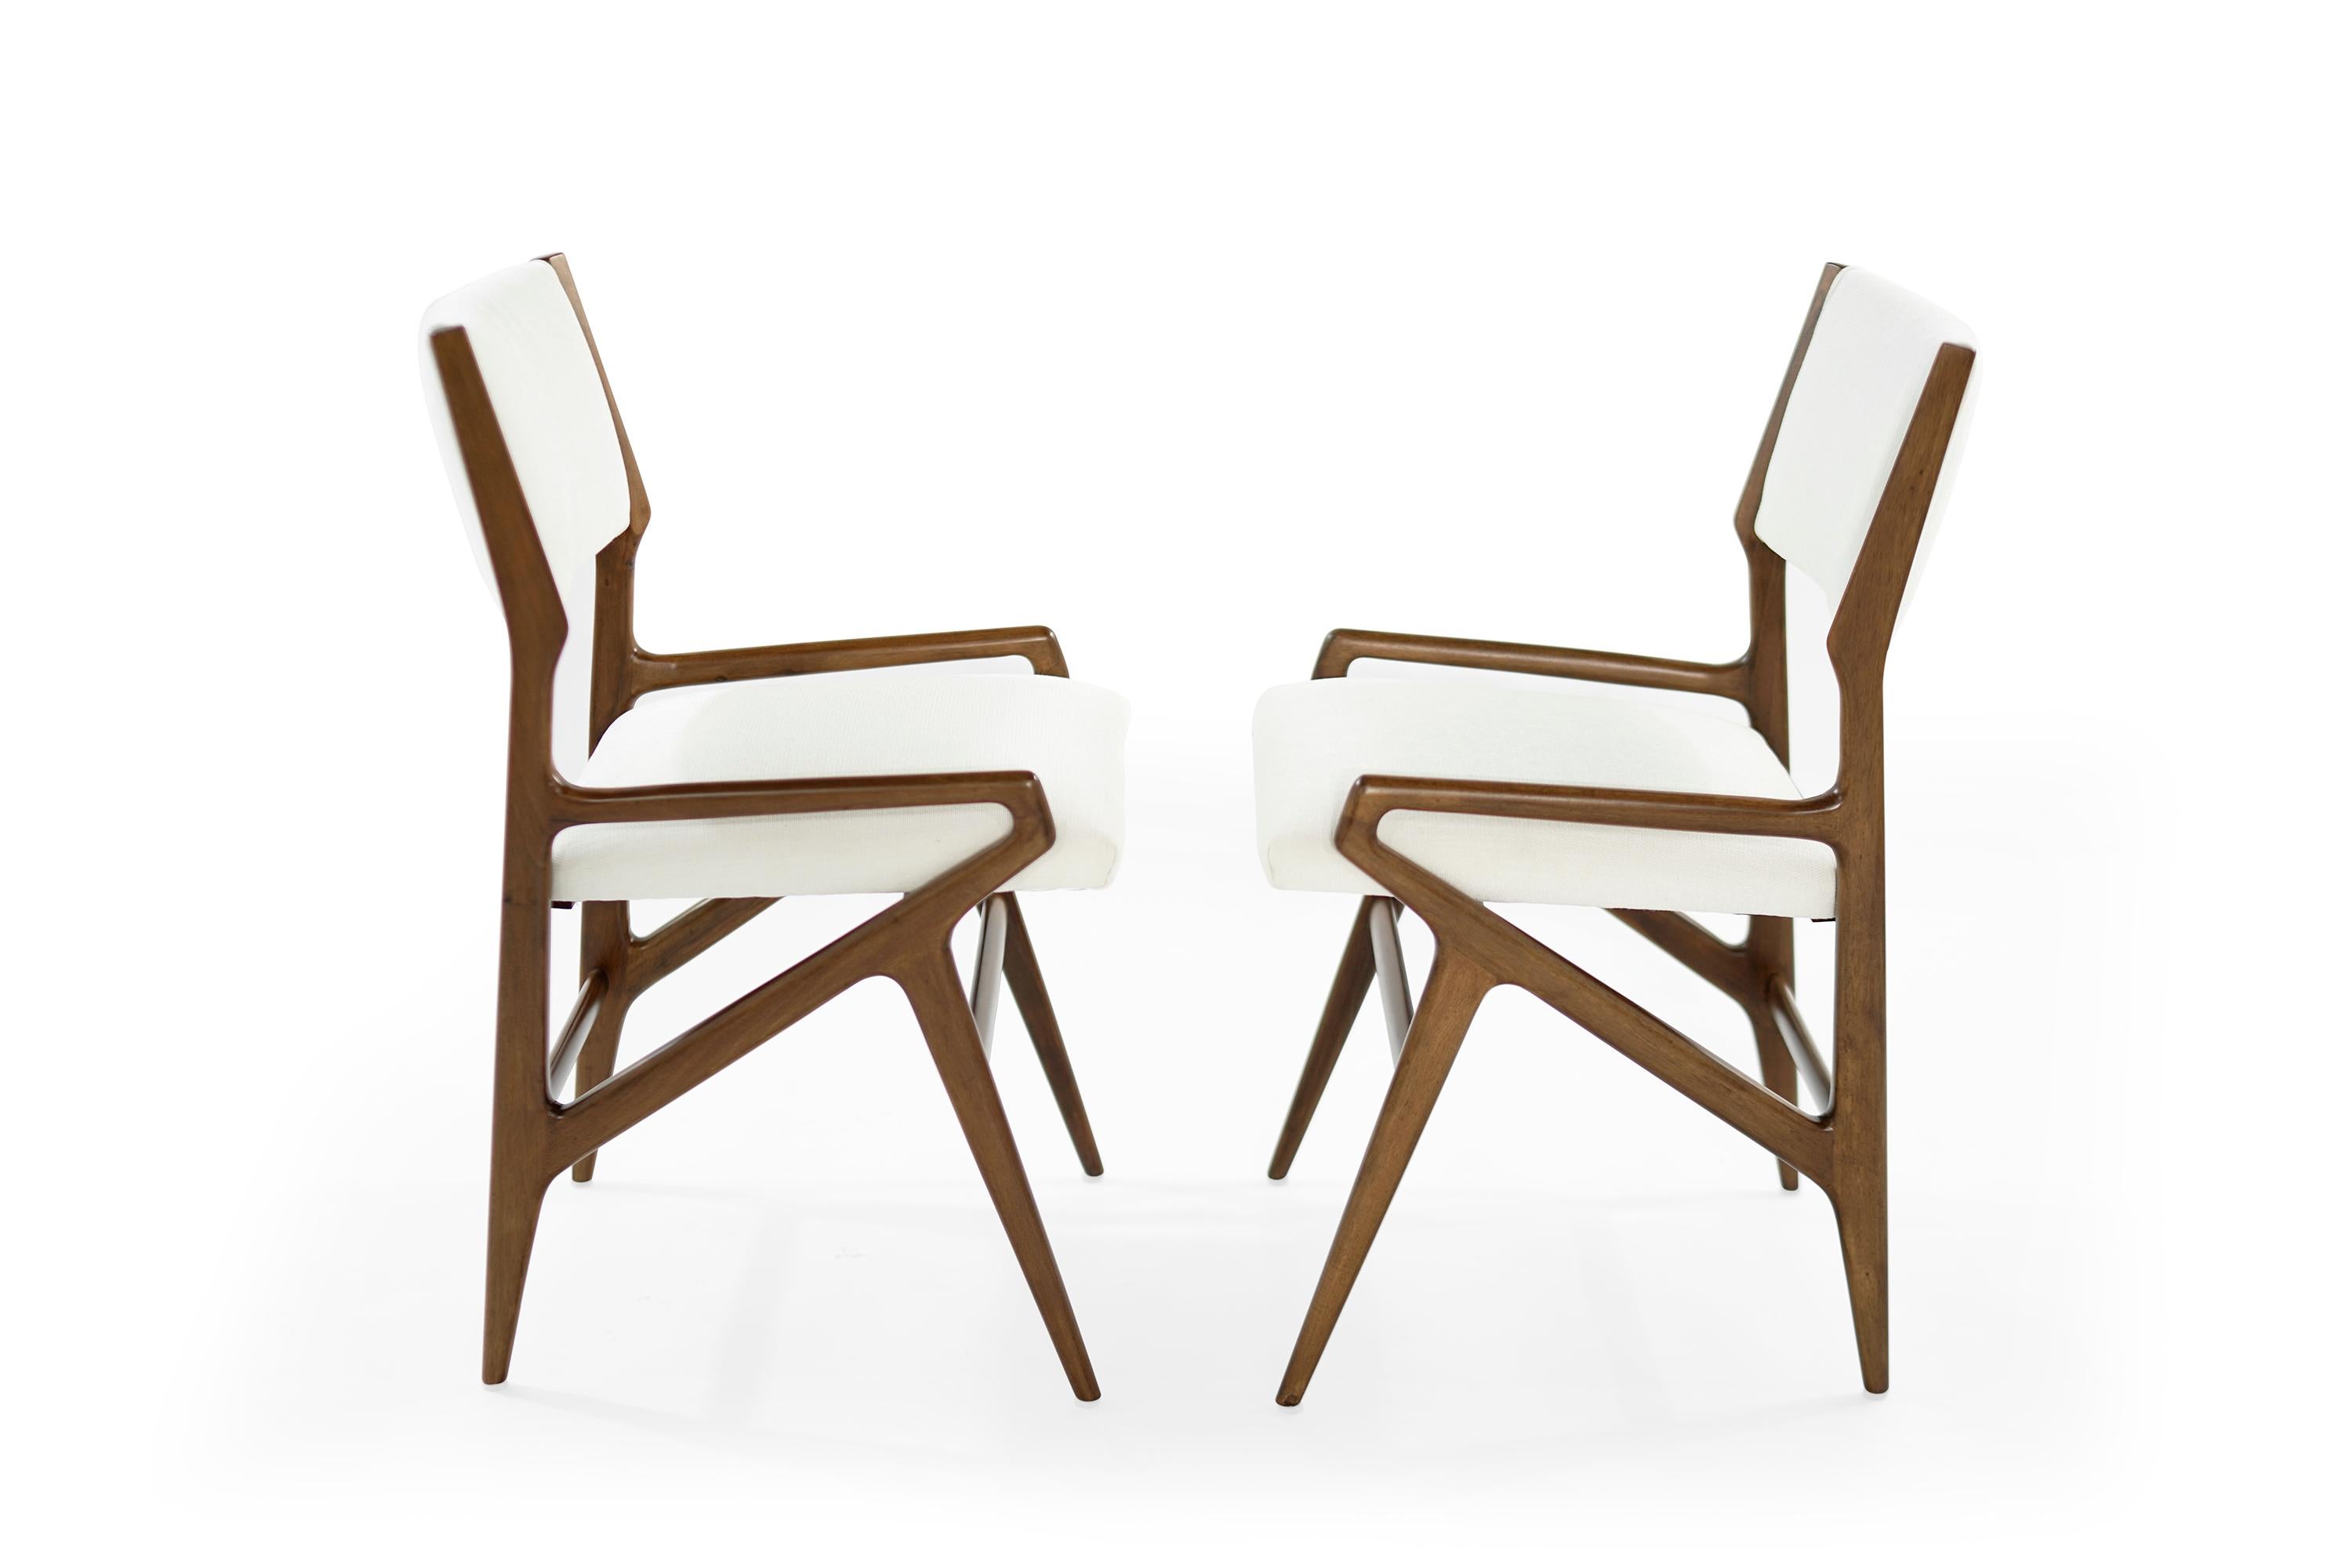 20th Century Dining Room Set by Gio Ponti for M. Singer & Sons, circa 1950s